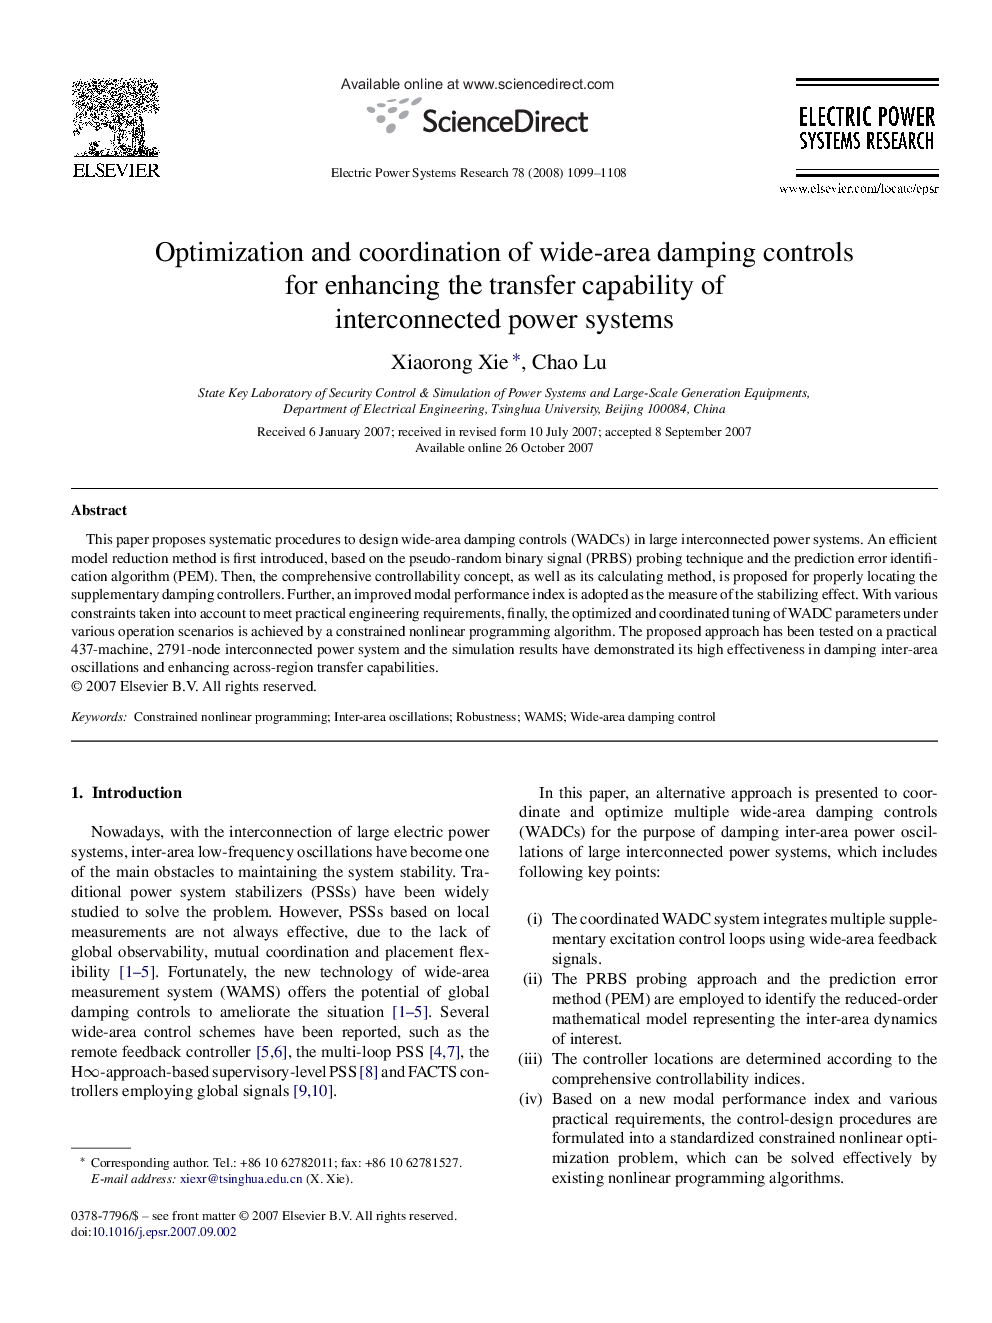 Optimization and coordination of wide-area damping controls for enhancing the transfer capability of interconnected power systems